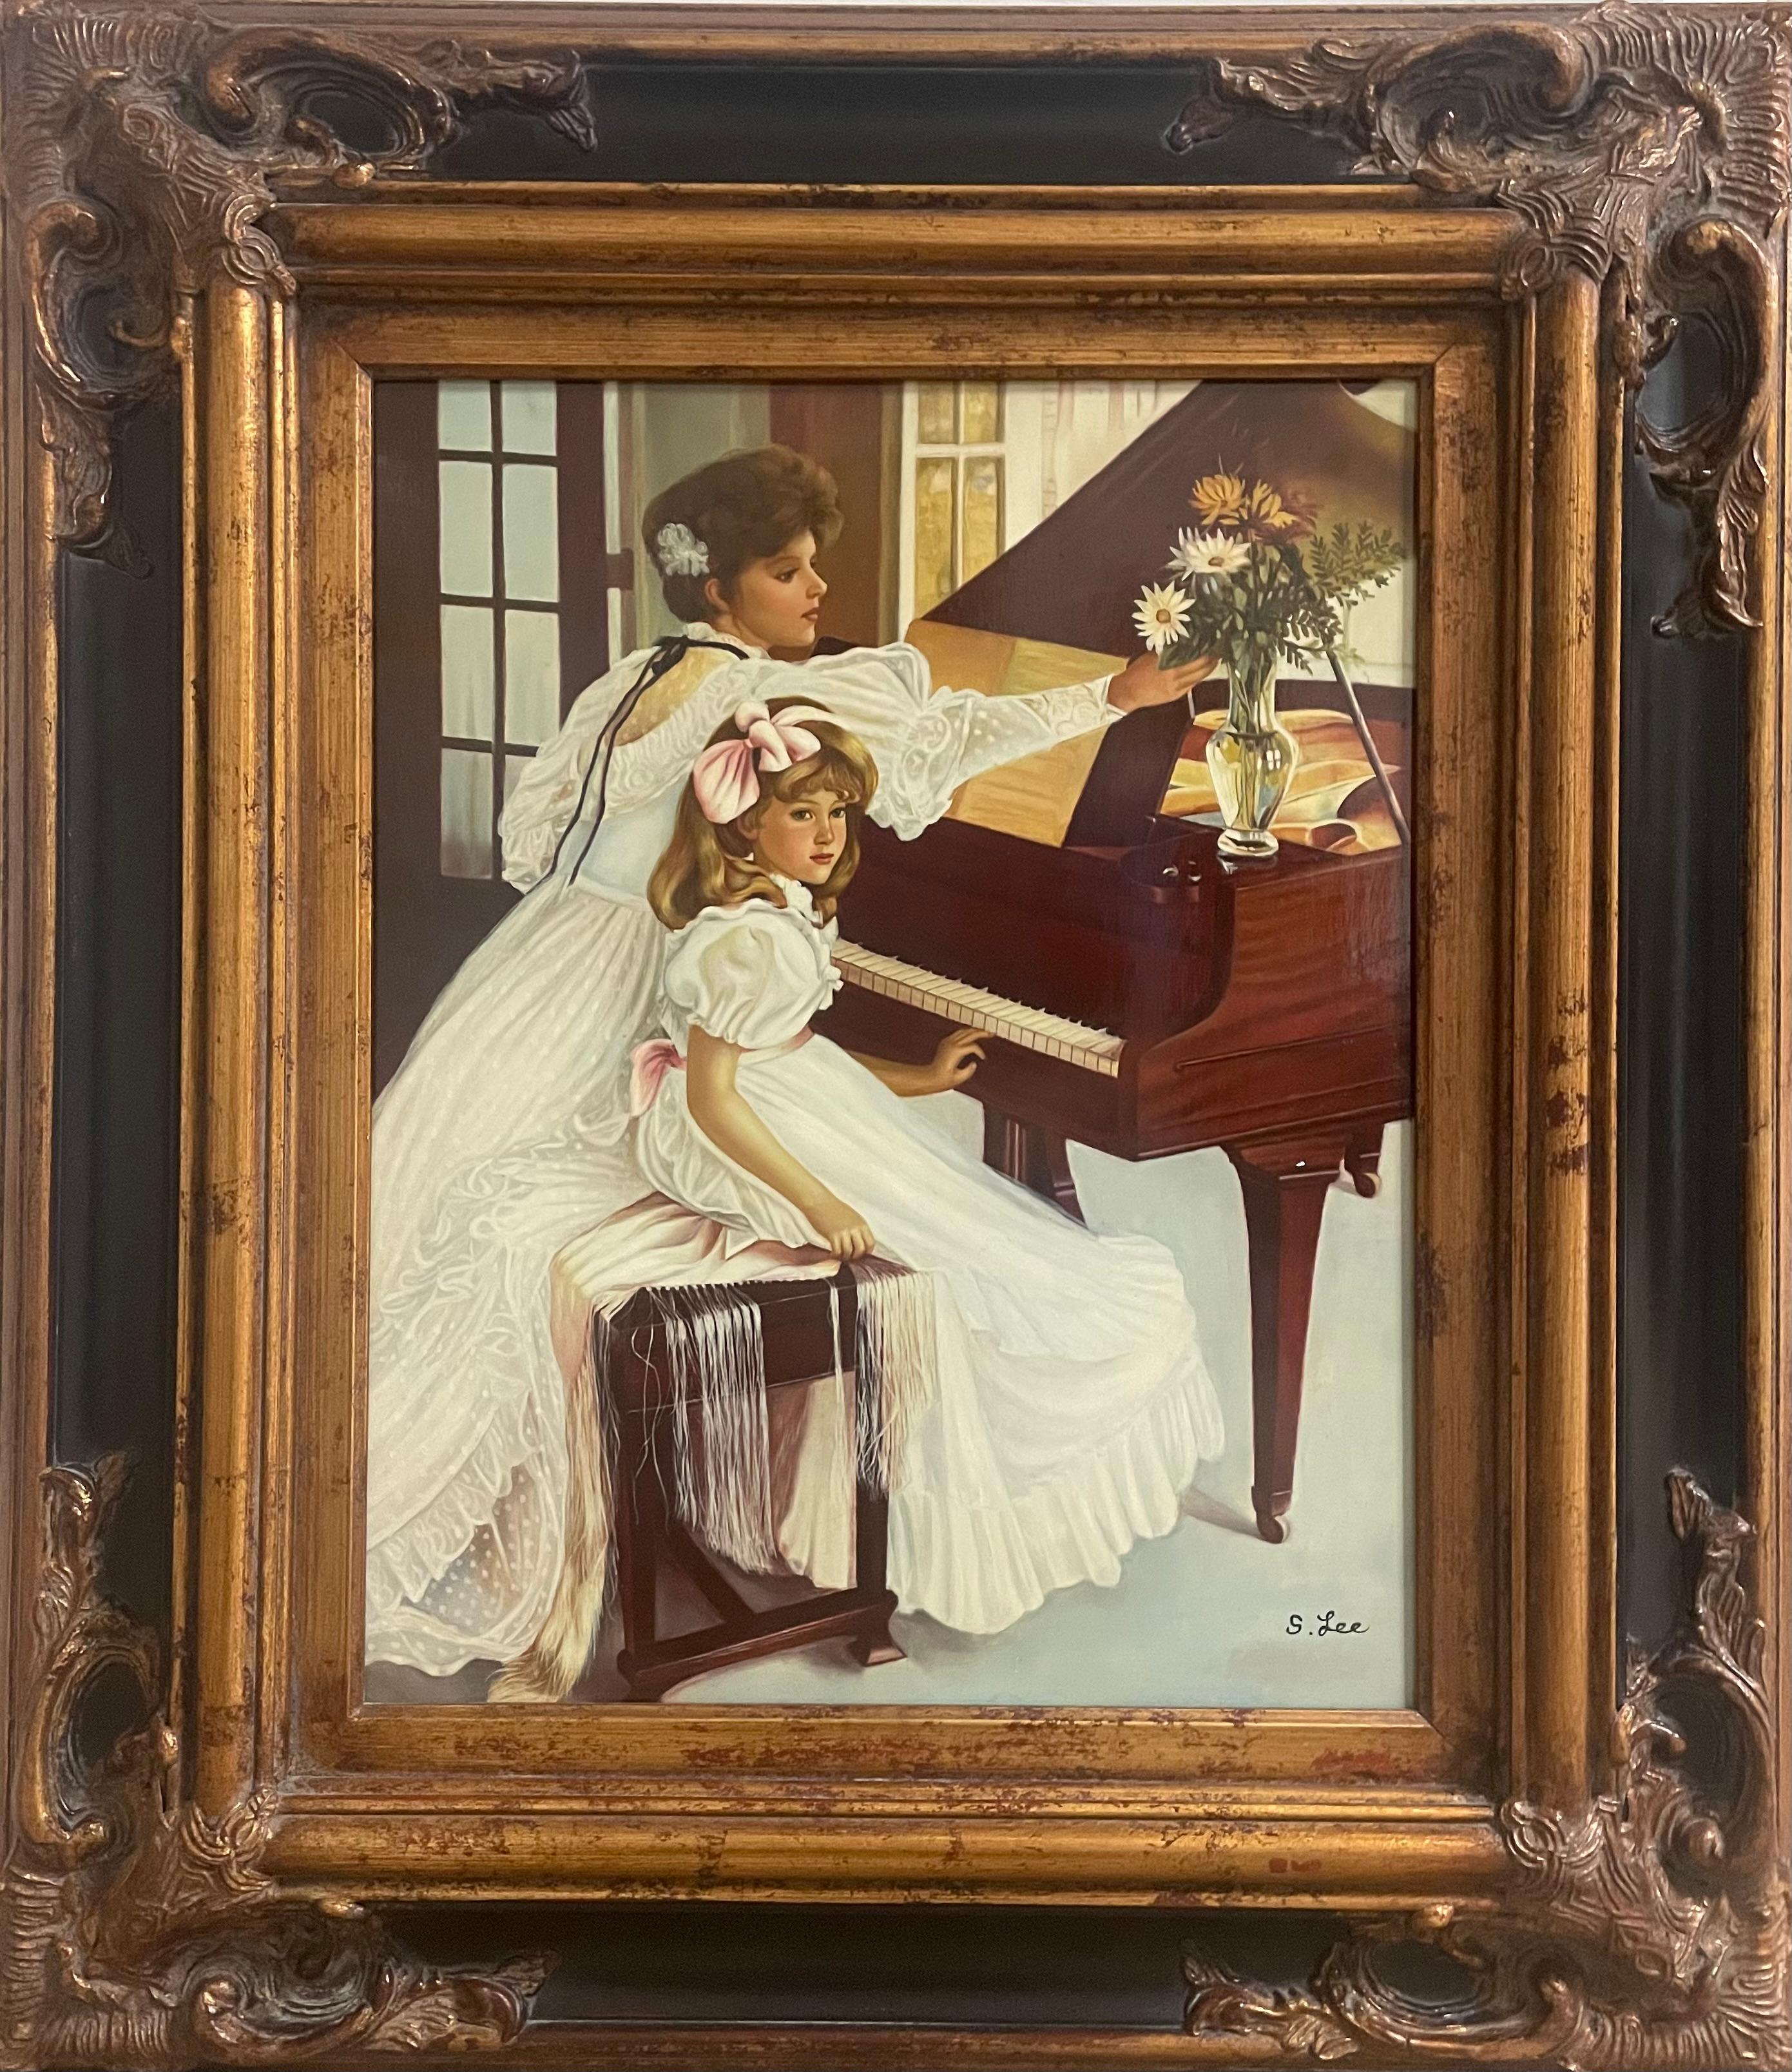 "First Recital" - Painting by S.H. Lee